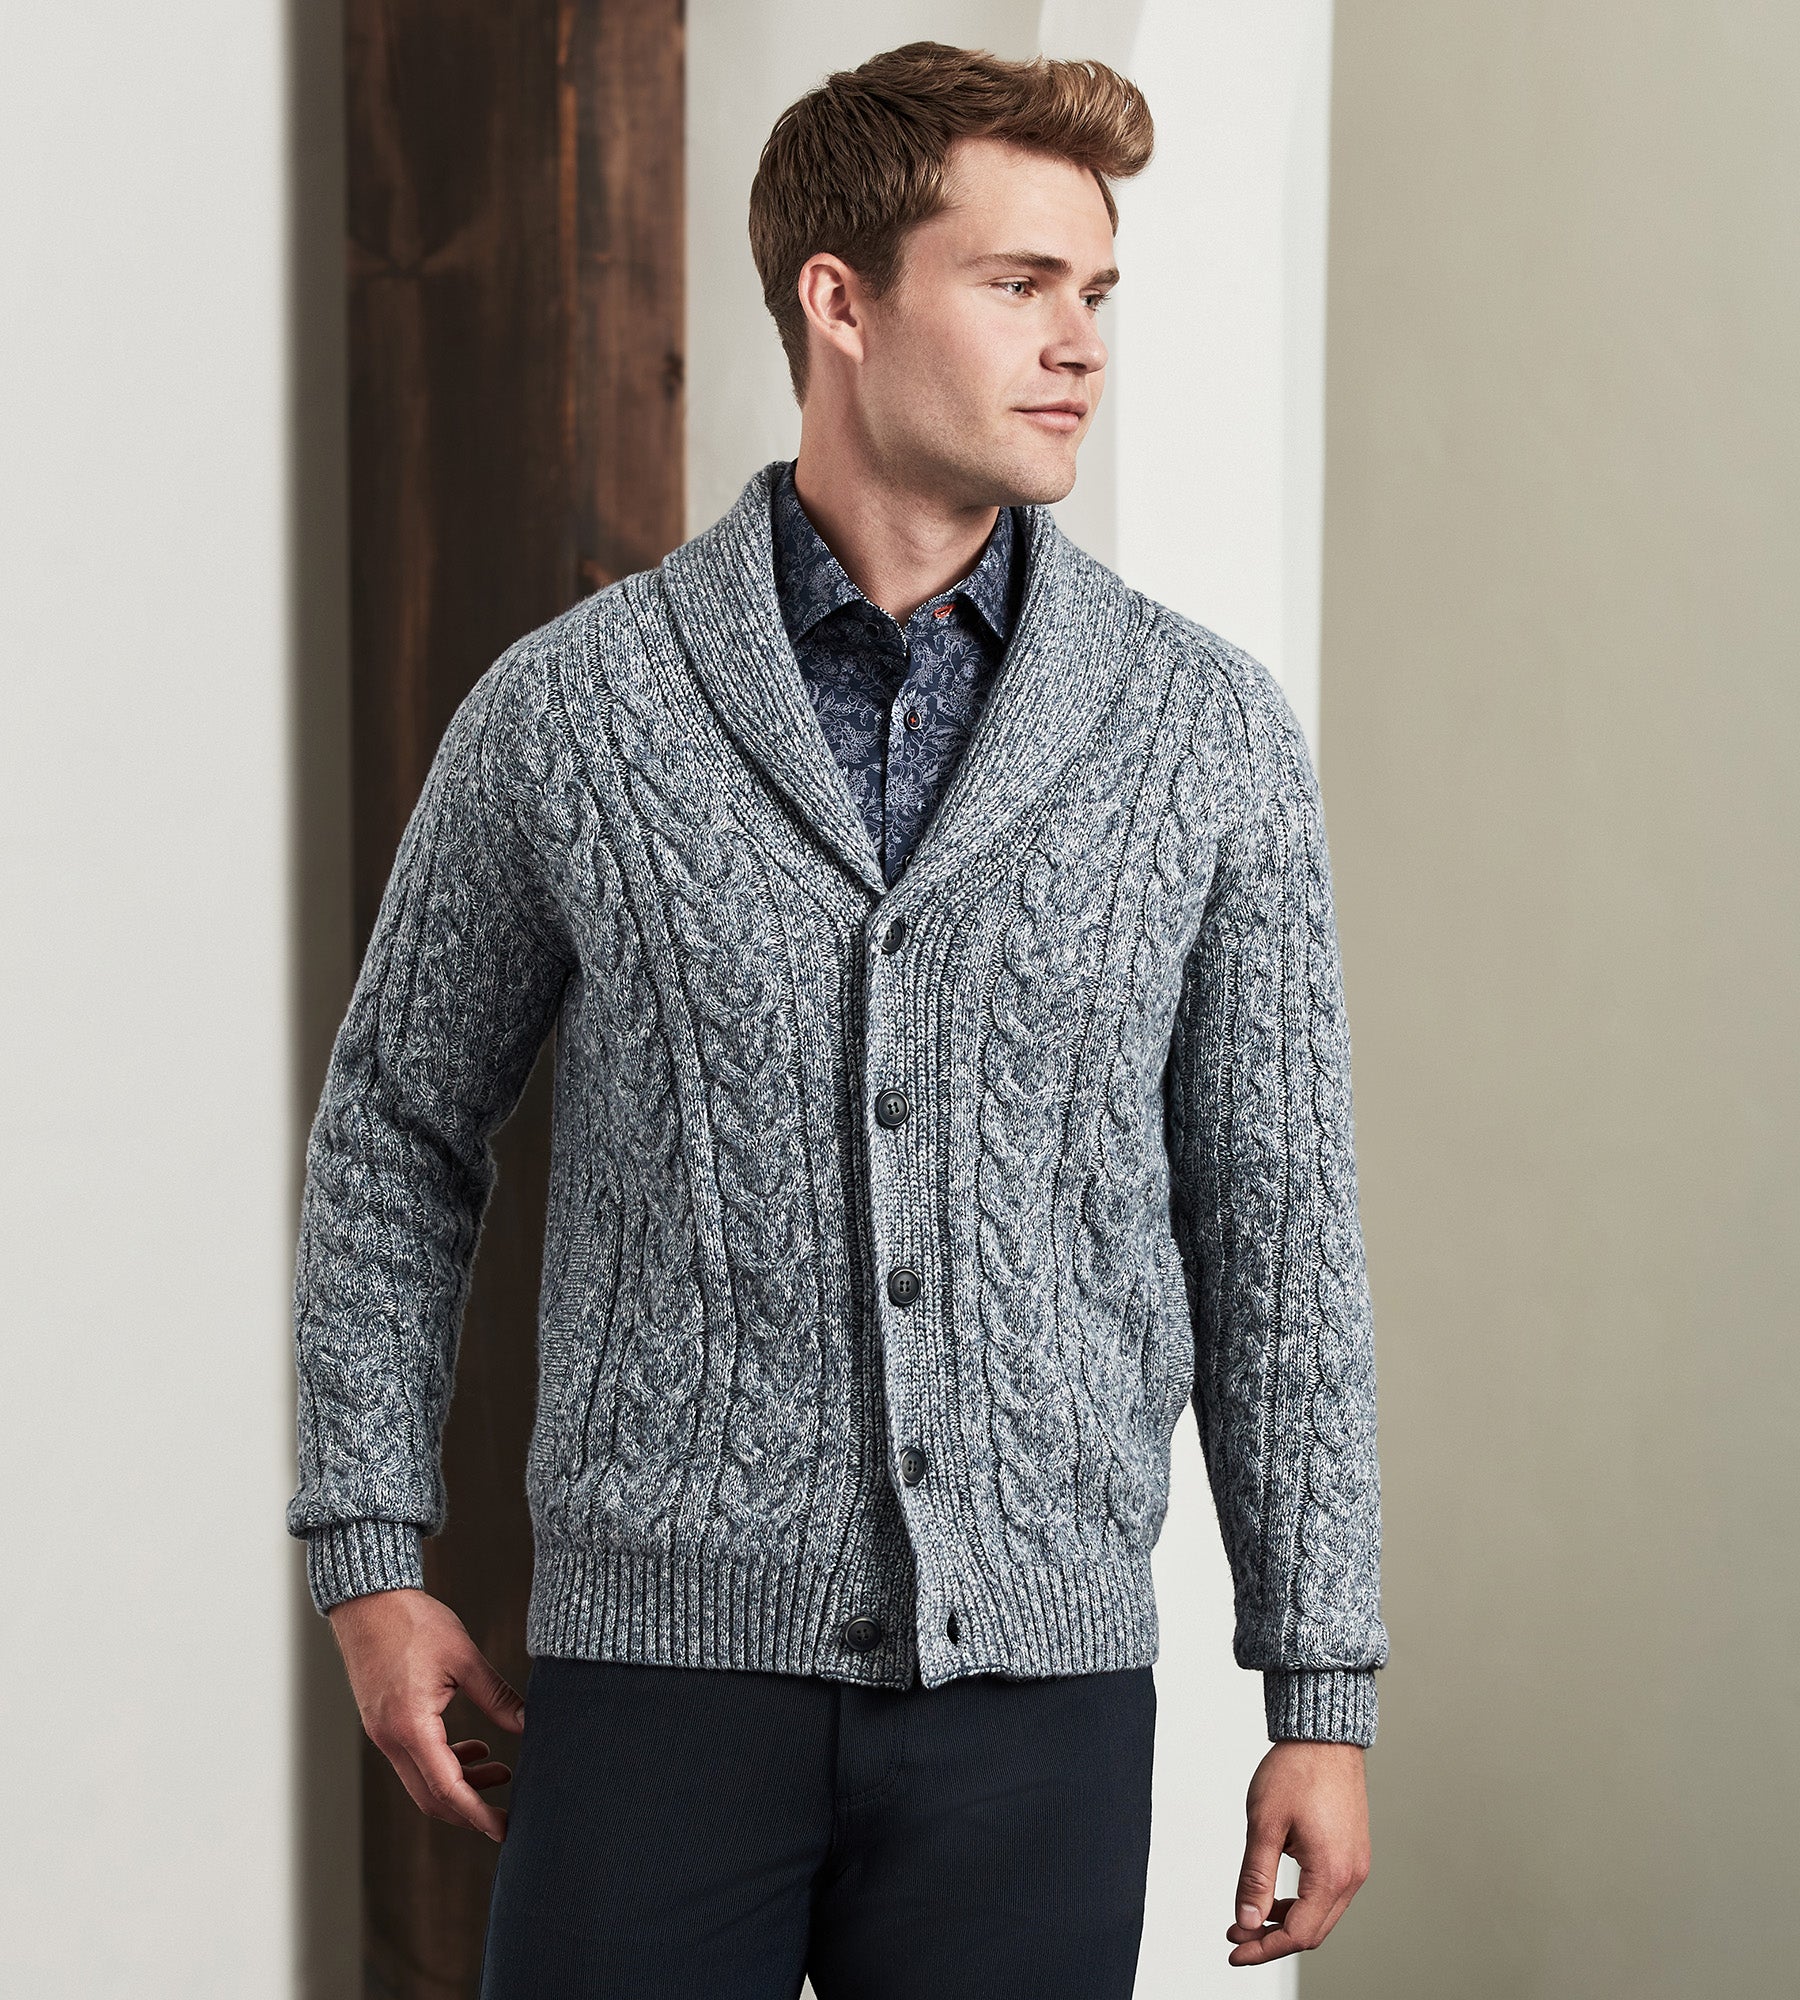 Let's Get Going Cardigan Sweater - Camel